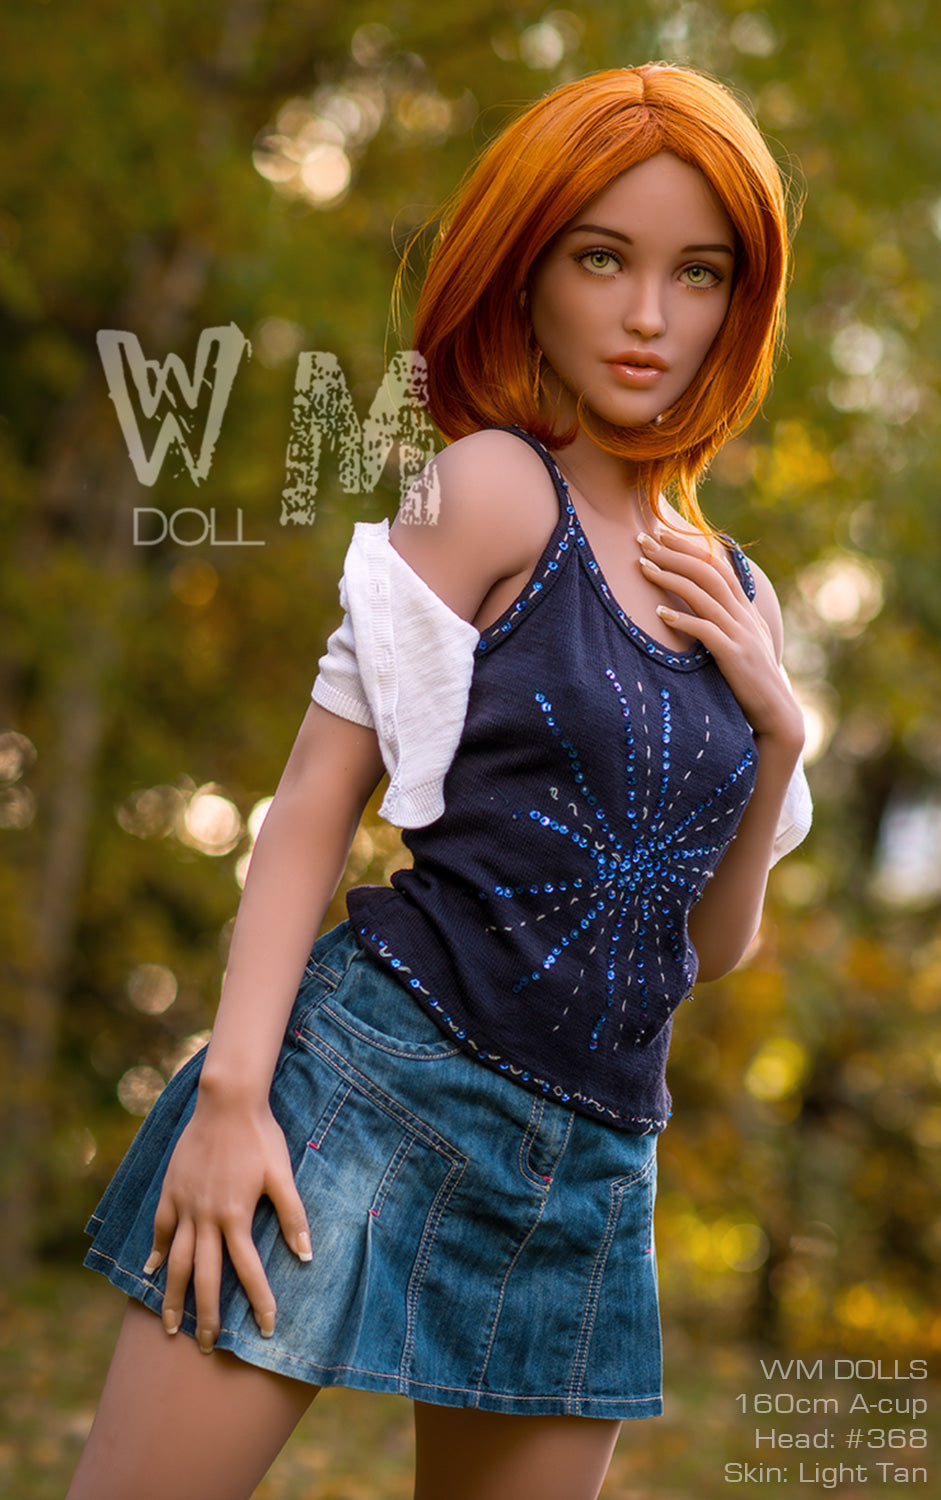 WM DOLL 160 CM A TPE - Lily | Buy Sex Dolls at DOLLS ACTUALLY